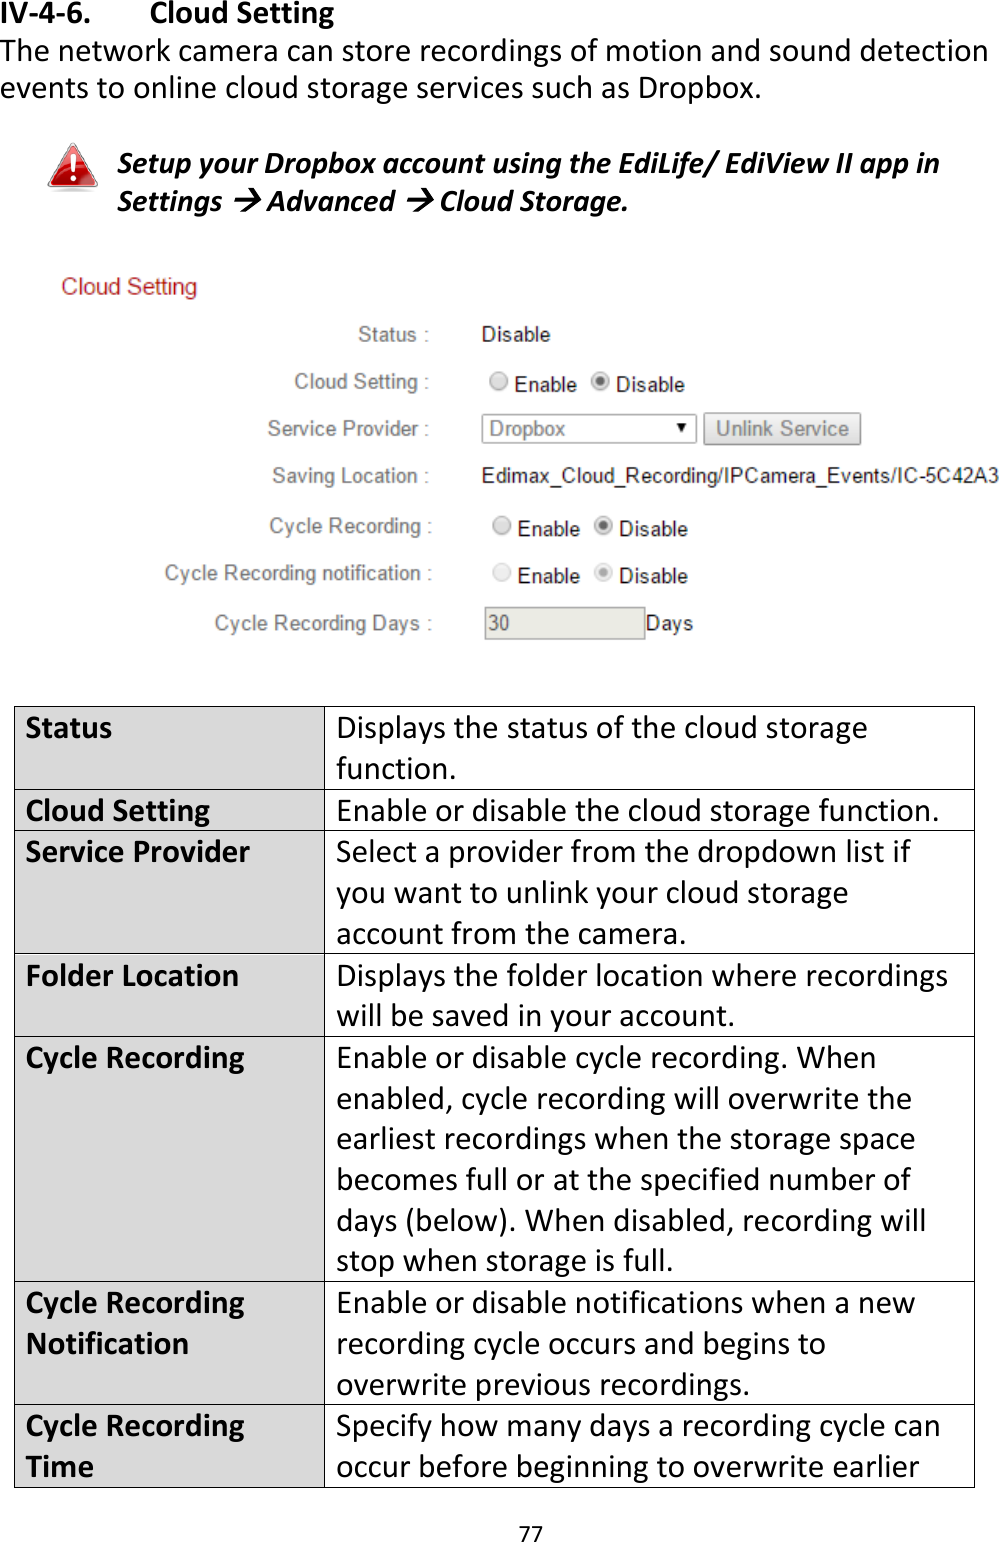 77  IV-4-6.   Cloud Setting The network camera can store recordings of motion and sound detection events to online cloud storage services such as Dropbox.  Setup your Dropbox account using the EdiLife/ EdiView II app in Settings  Advanced  Cloud Storage.    Status Displays the status of the cloud storage function. Cloud Setting Enable or disable the cloud storage function. Service Provider Select a provider from the dropdown list if you want to unlink your cloud storage account from the camera. Folder Location Displays the folder location where recordings will be saved in your account. Cycle Recording Enable or disable cycle recording. When enabled, cycle recording will overwrite the earliest recordings when the storage space becomes full or at the specified number of days (below). When disabled, recording will stop when storage is full. Cycle Recording Notification Enable or disable notifications when a new recording cycle occurs and begins to overwrite previous recordings. Cycle Recording Time Specify how many days a recording cycle can occur before beginning to overwrite earlier 